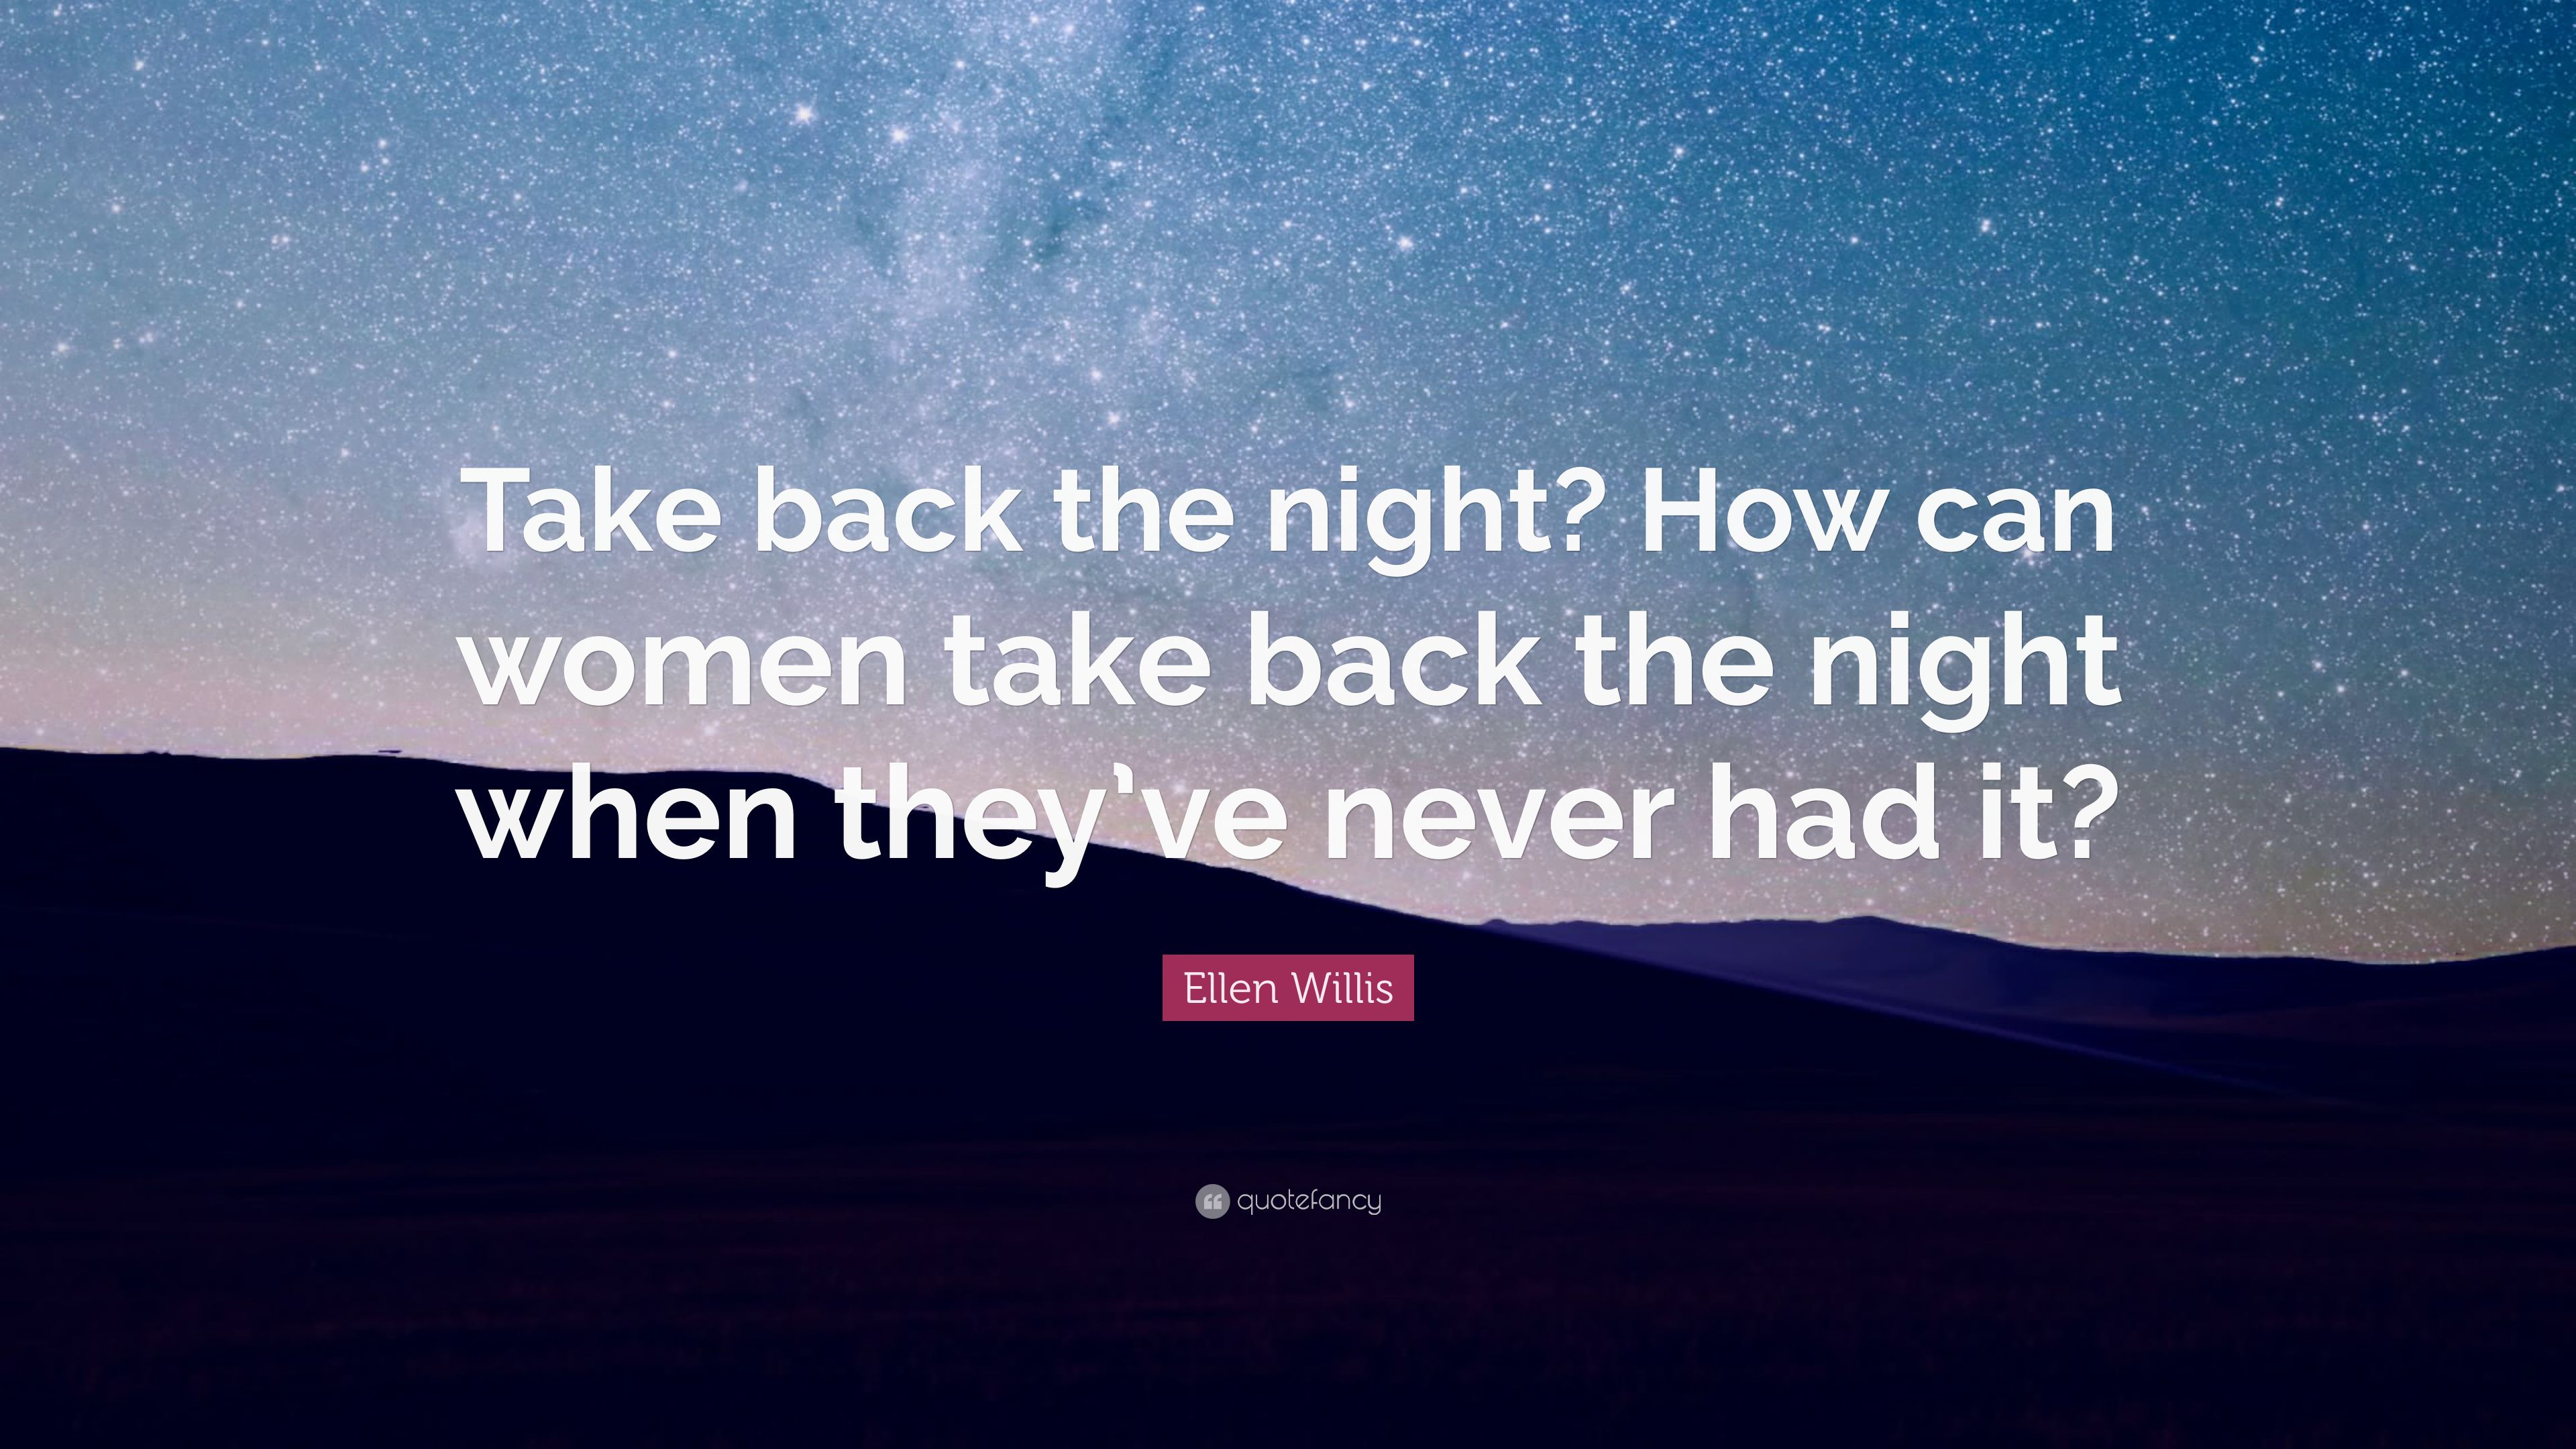 Ellen Willis Quote: “Take back the night? How can women take back